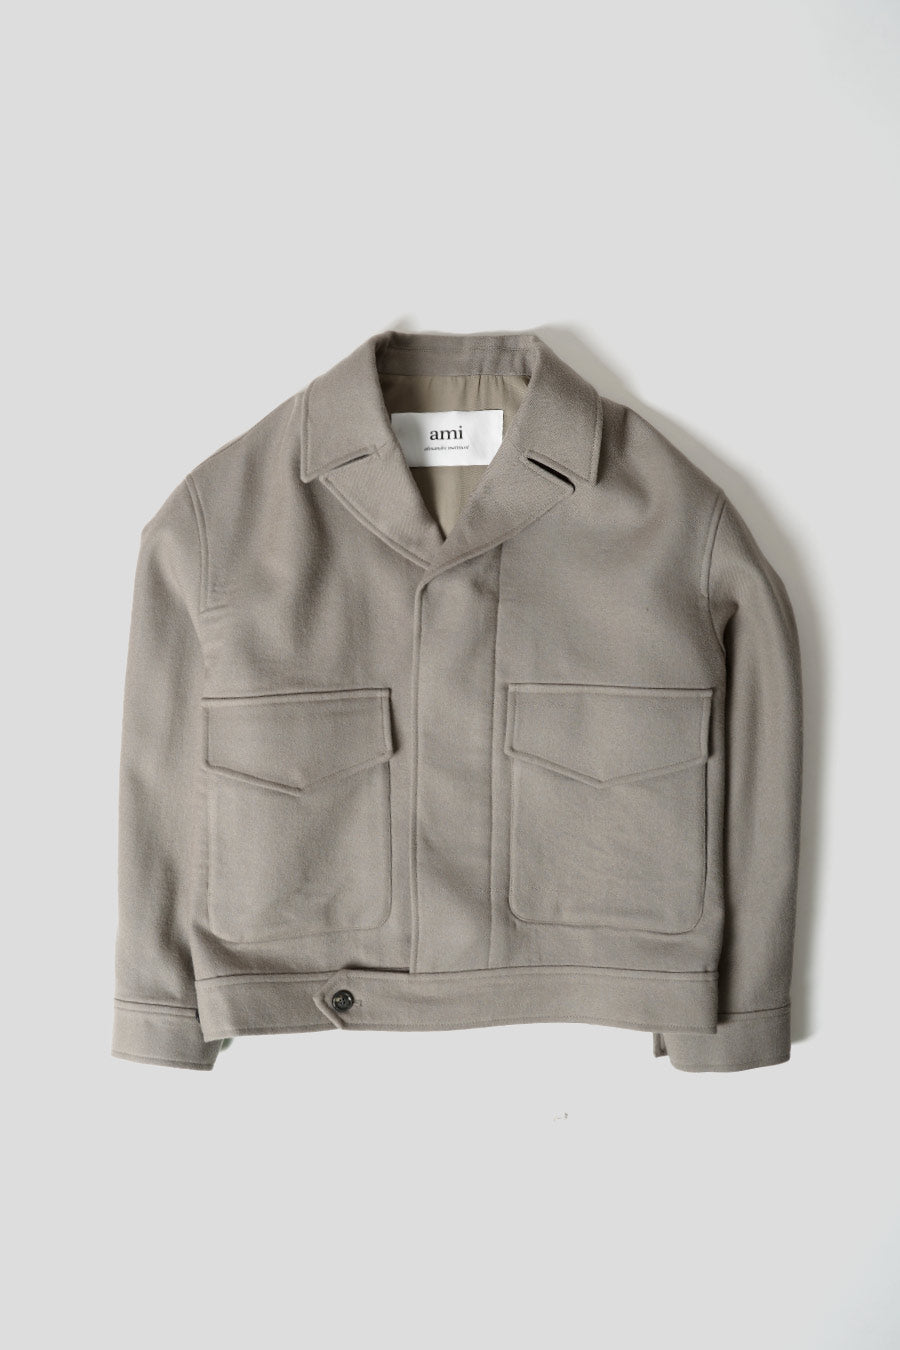 AMI PARIS - OVERSIZED BUTTON-DOWN JACKET IN TAUPE - LE LABO STORE